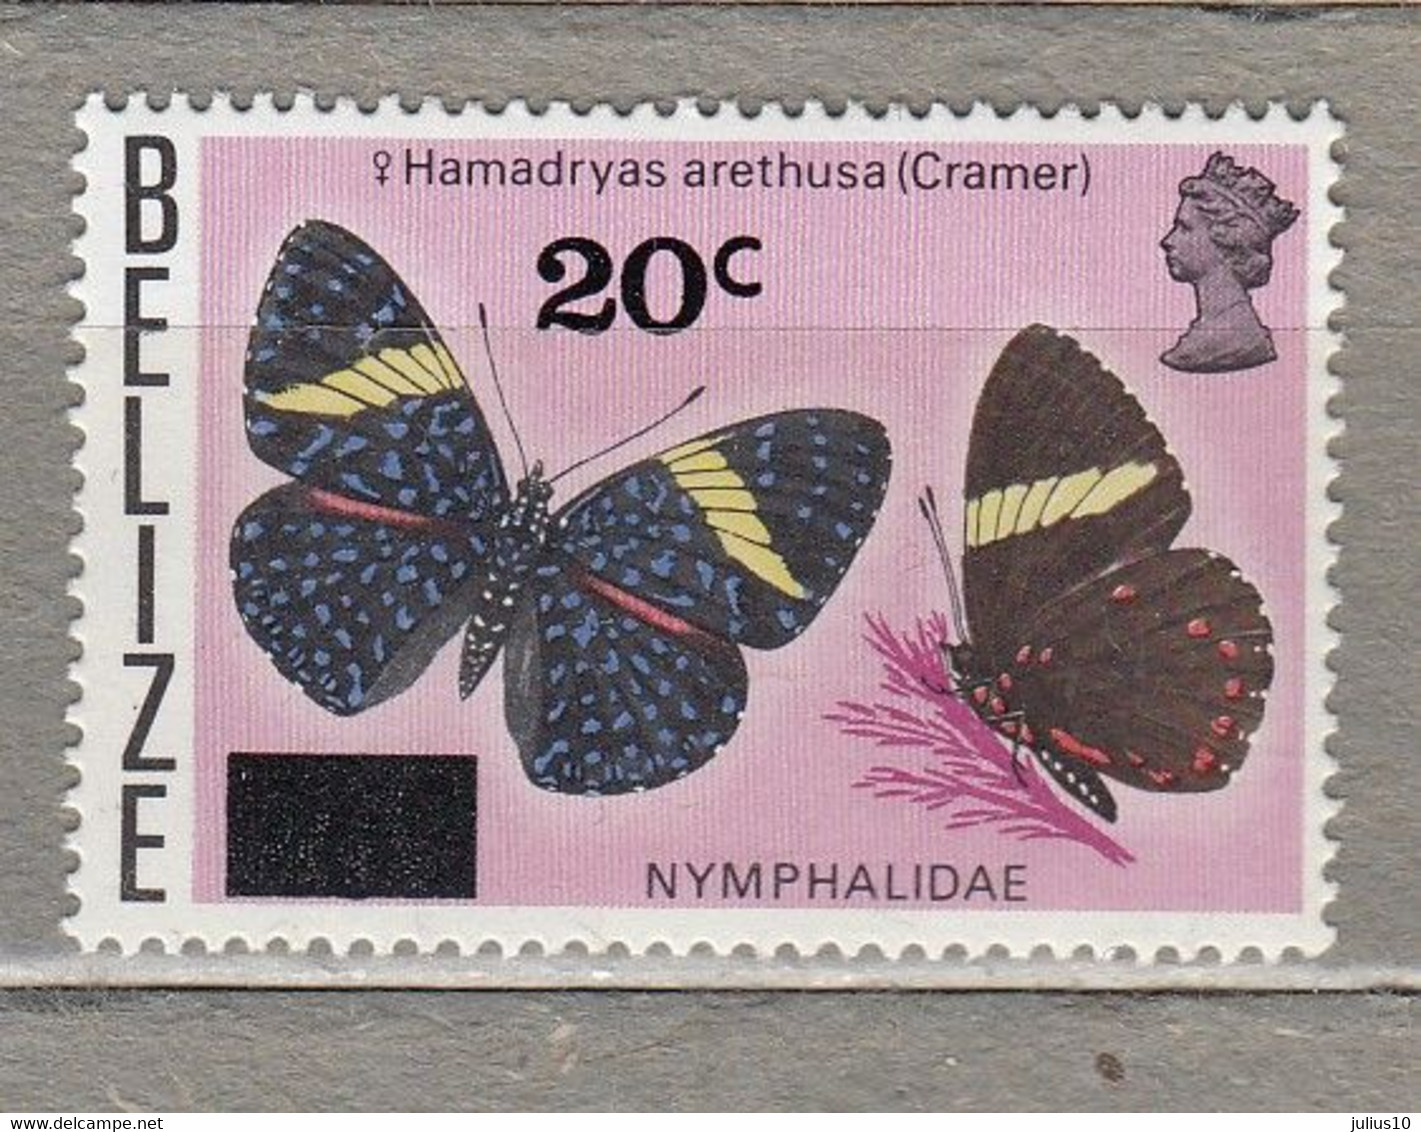 BRITISH COLLONIES BELIZE Fauna Insects Butterflies 1976 MNH(**) Mi 363 #27935 - Papillons